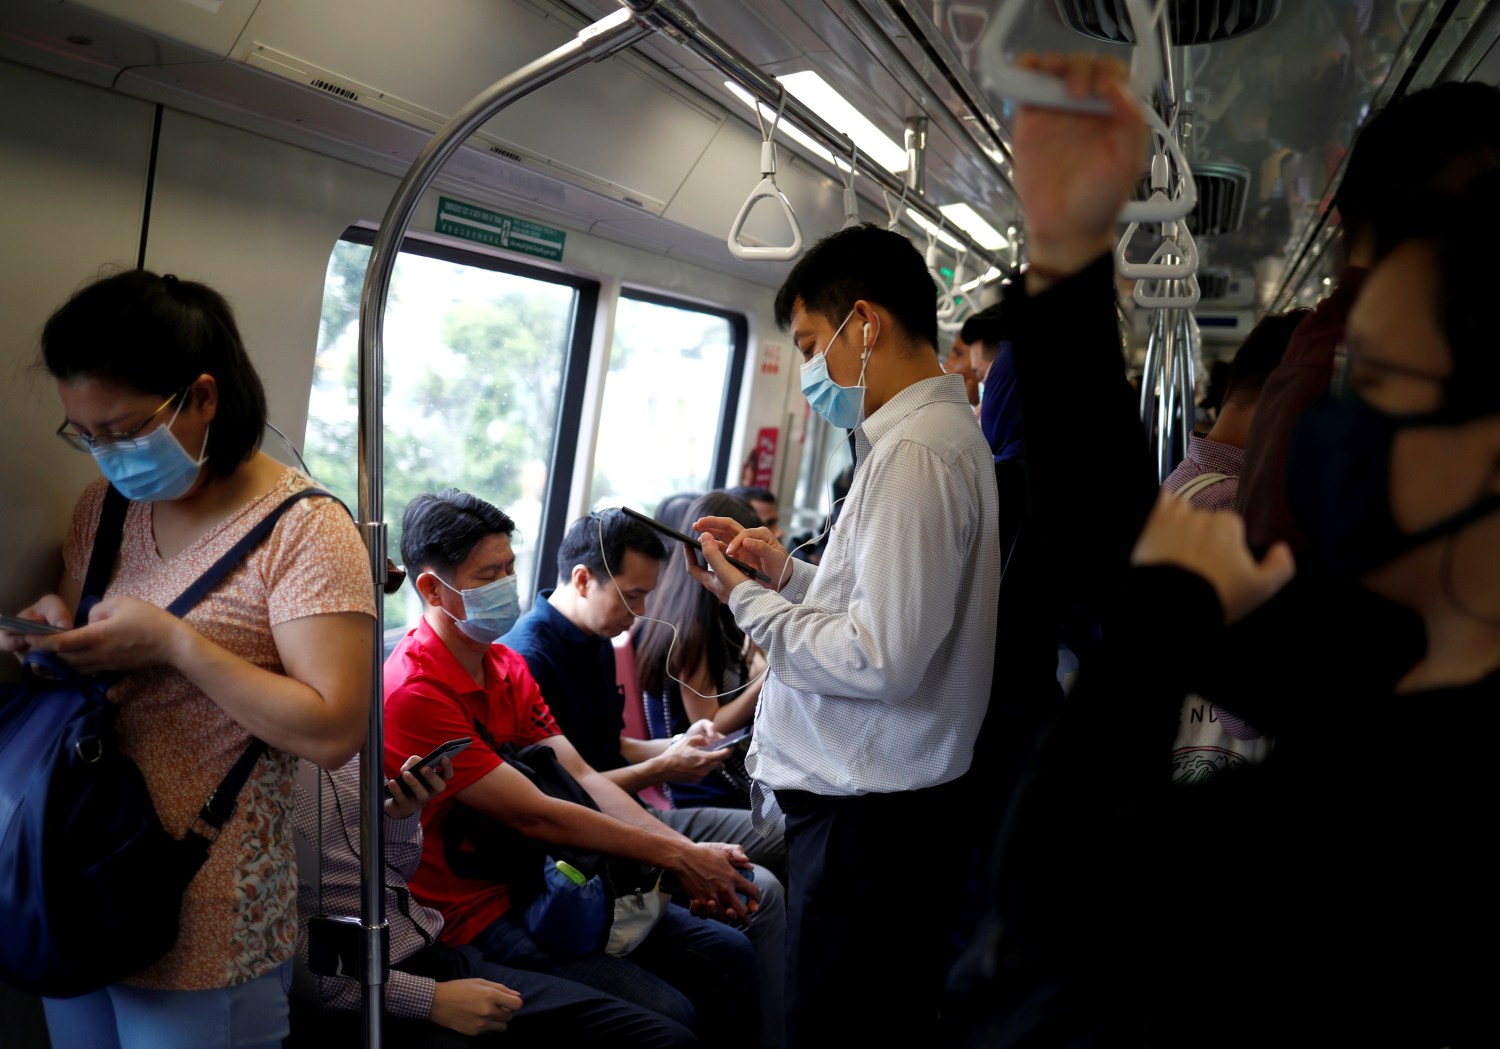 Commuters wearing masks in precaution of the coronavirus outbreak are pictured in a train during their morning commute in Singapore February 18, 2020. REUTERS/Edgar Su